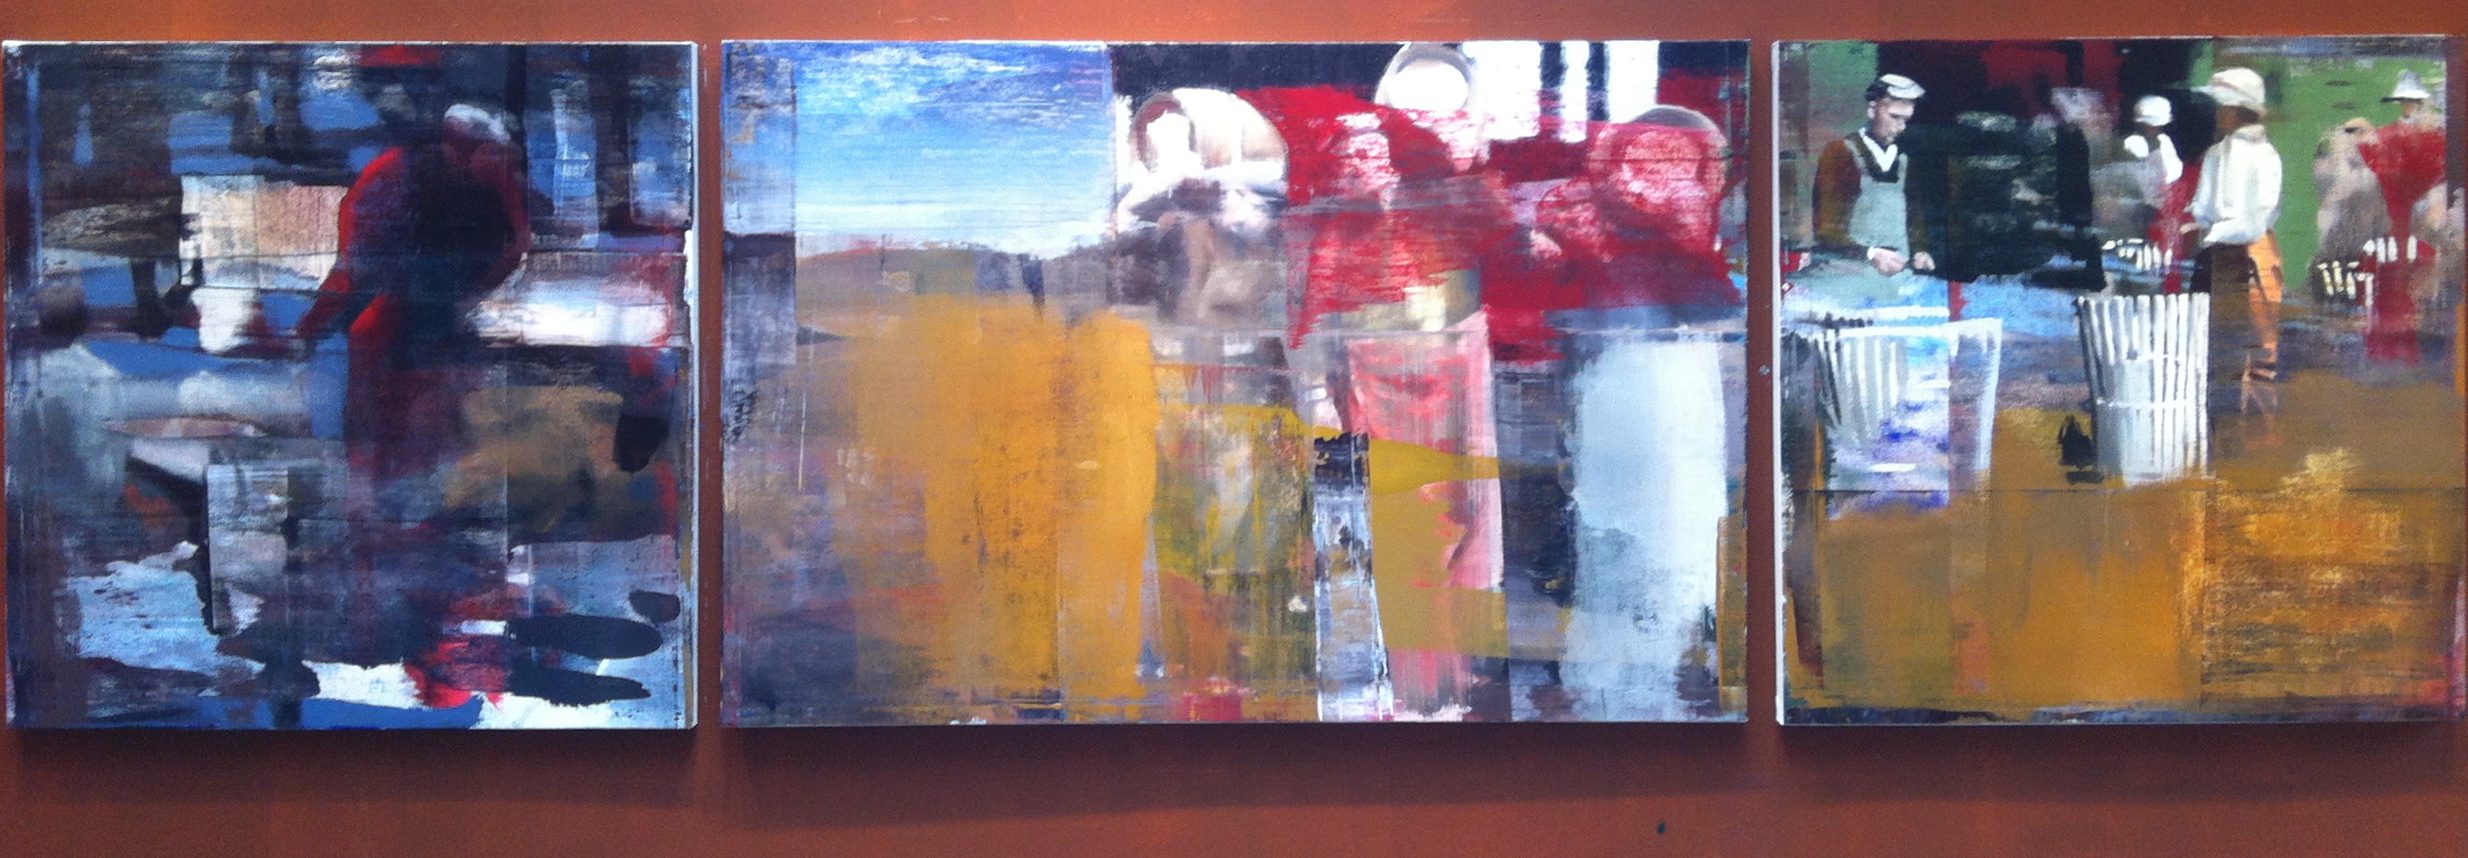 8. Moving the Barrels, Oil on Linen on Panel, 2013, 48” X 168”